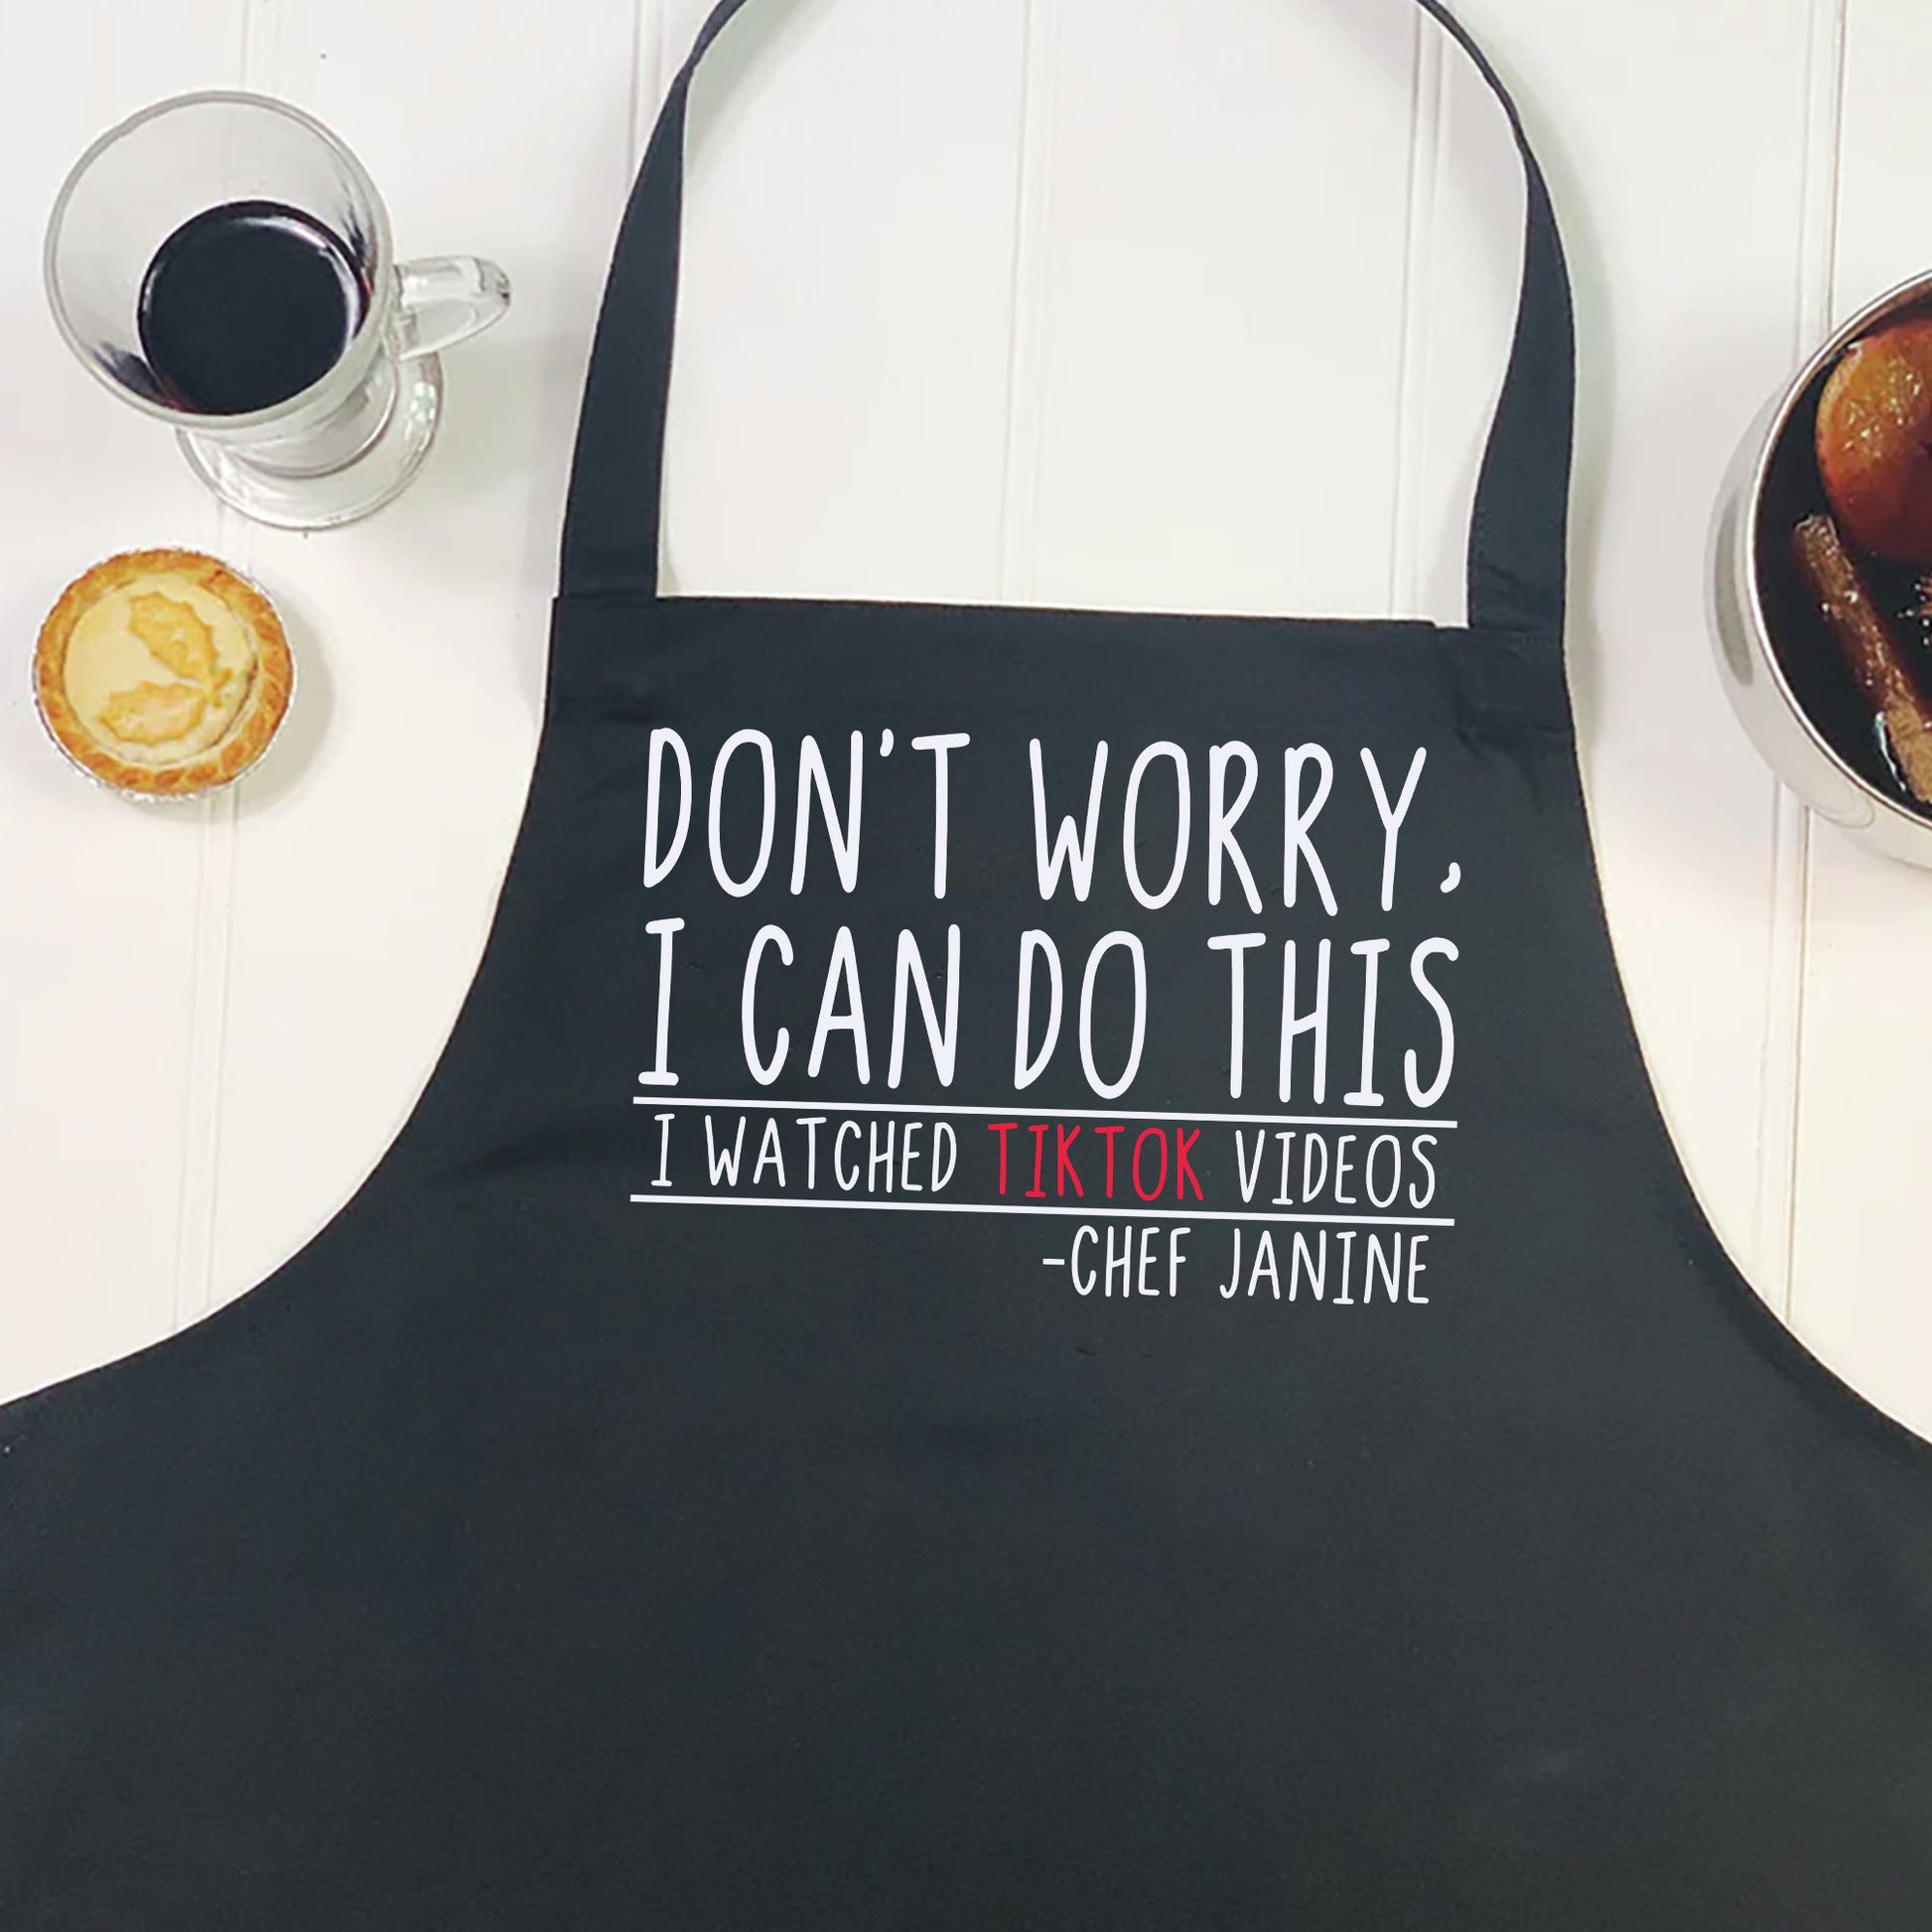 Mens Personalised Apron, Printed Kitchen Apron, Fathers Day Gift, Gift for Grandad, Brother, Secret Santa xmas husband - BBQ Cooking